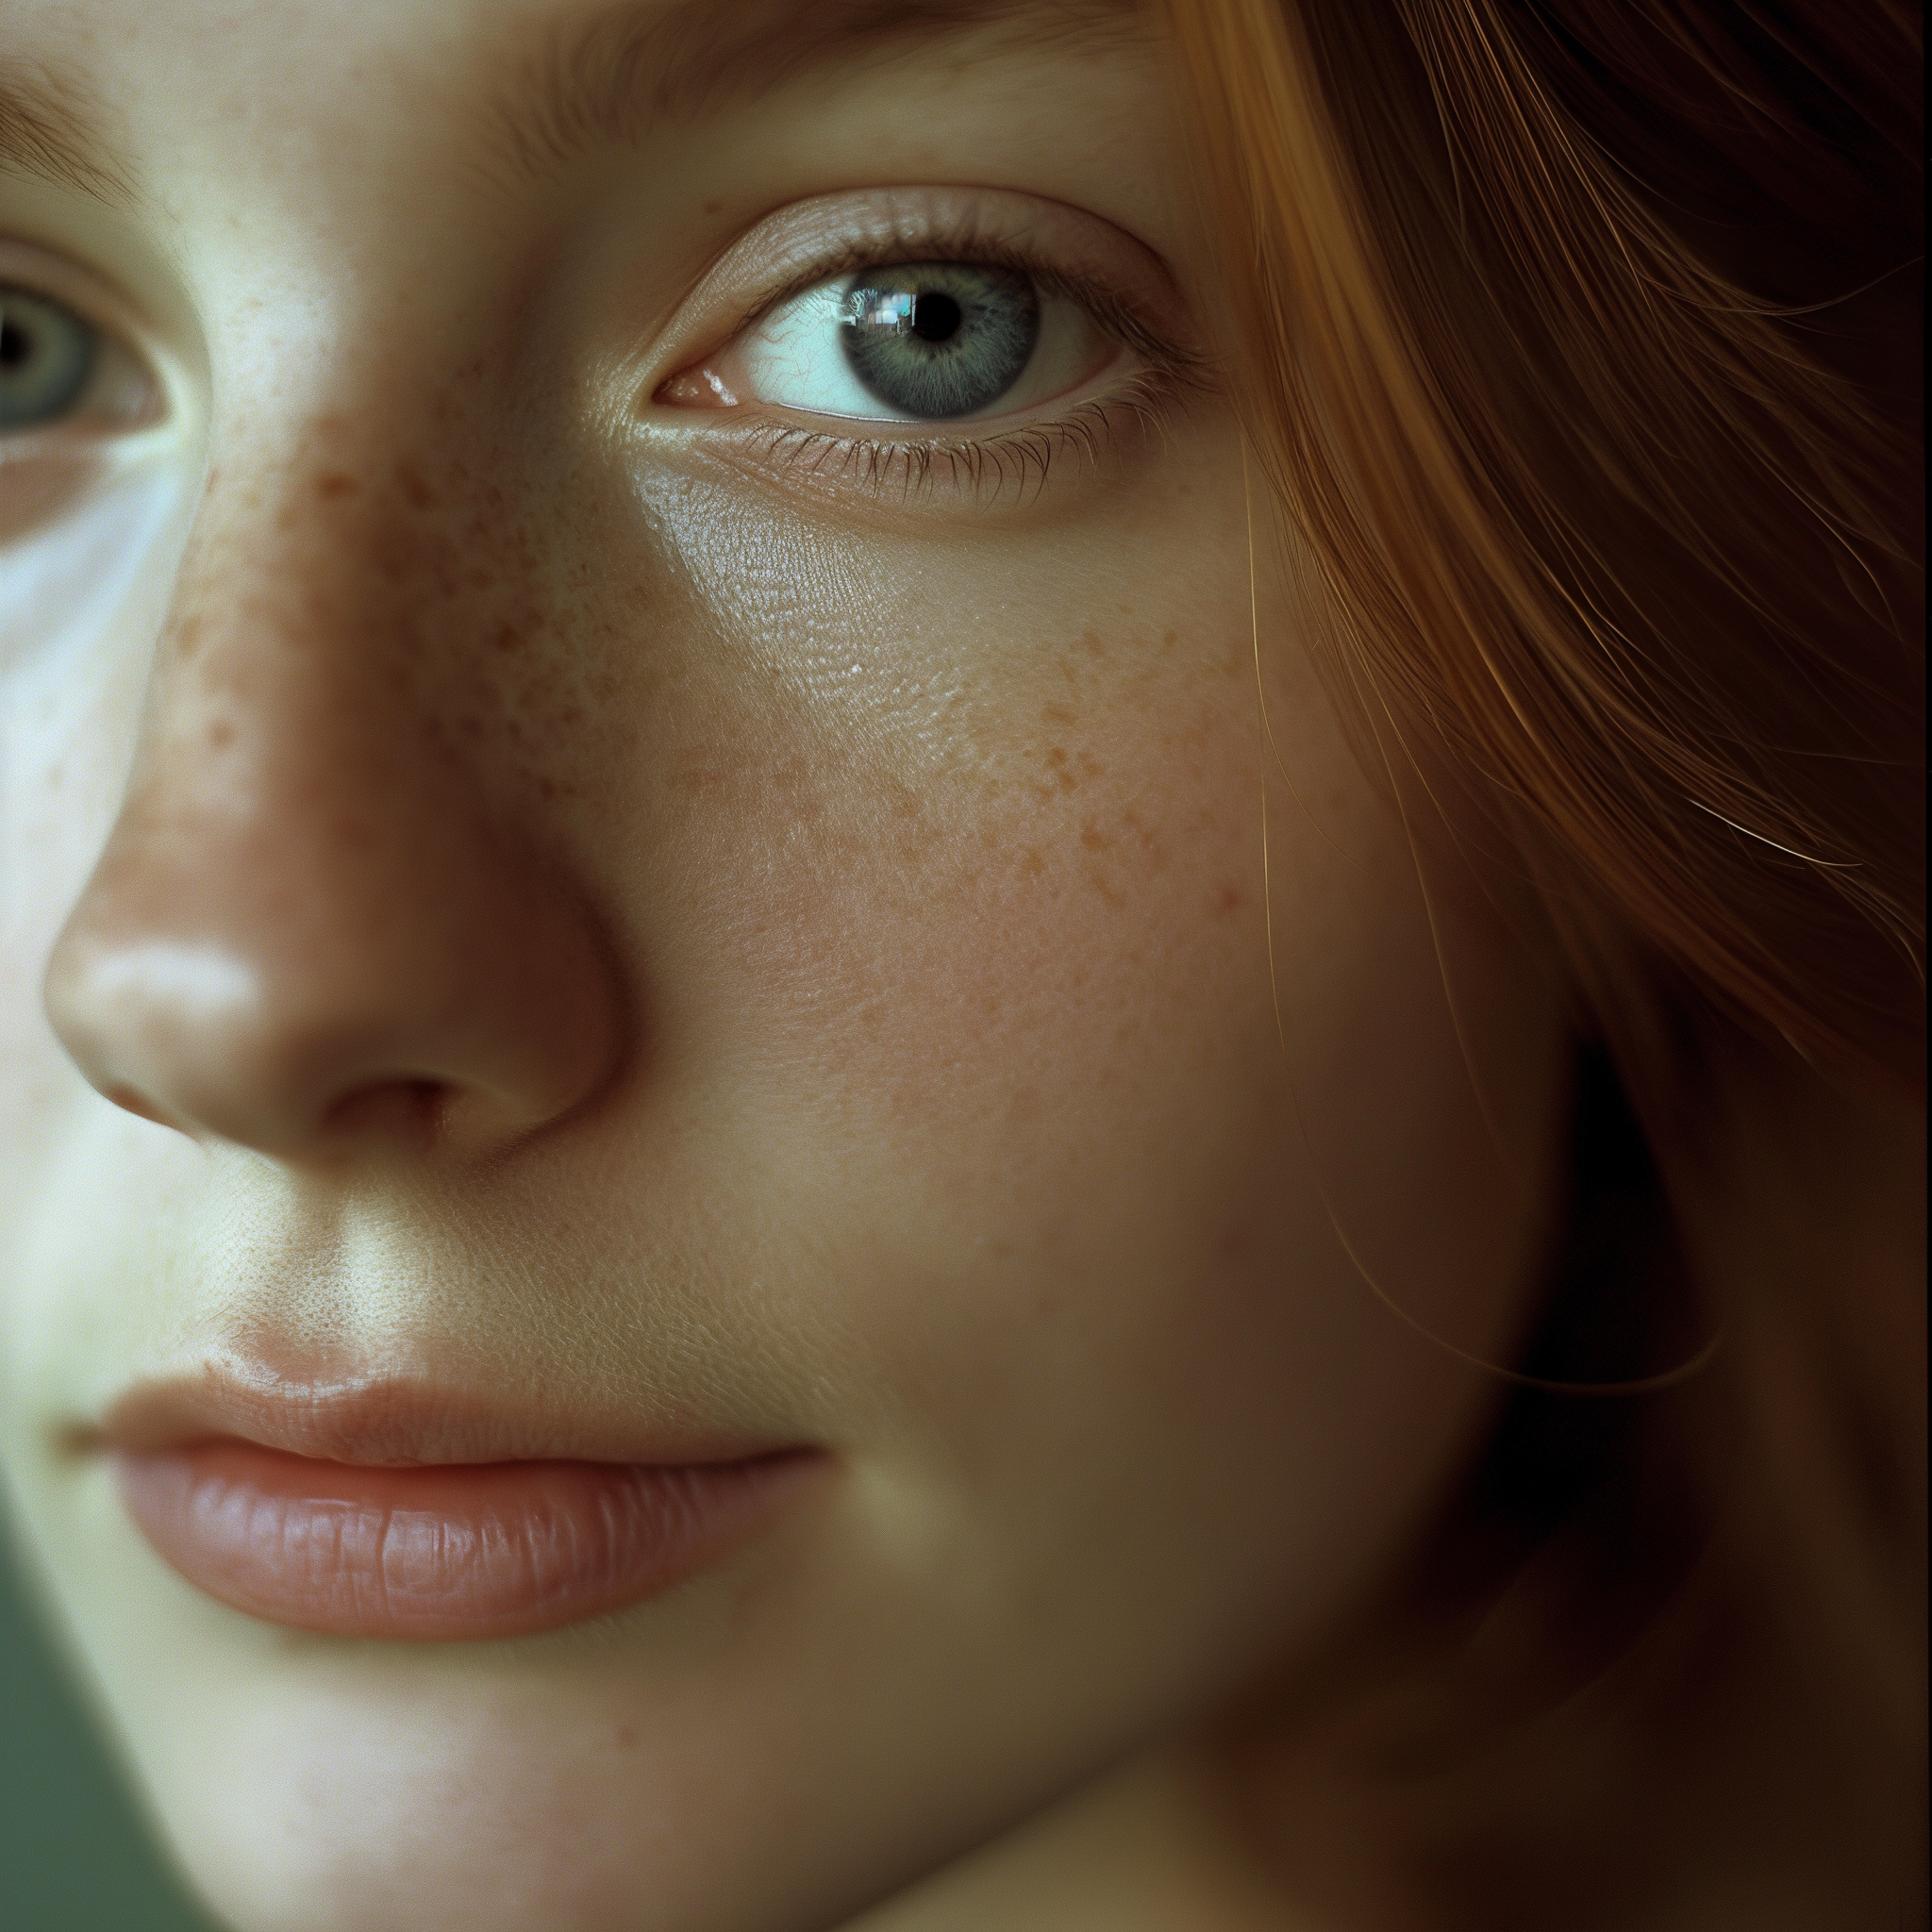 A close-up of a young woman | Source: Midjourney